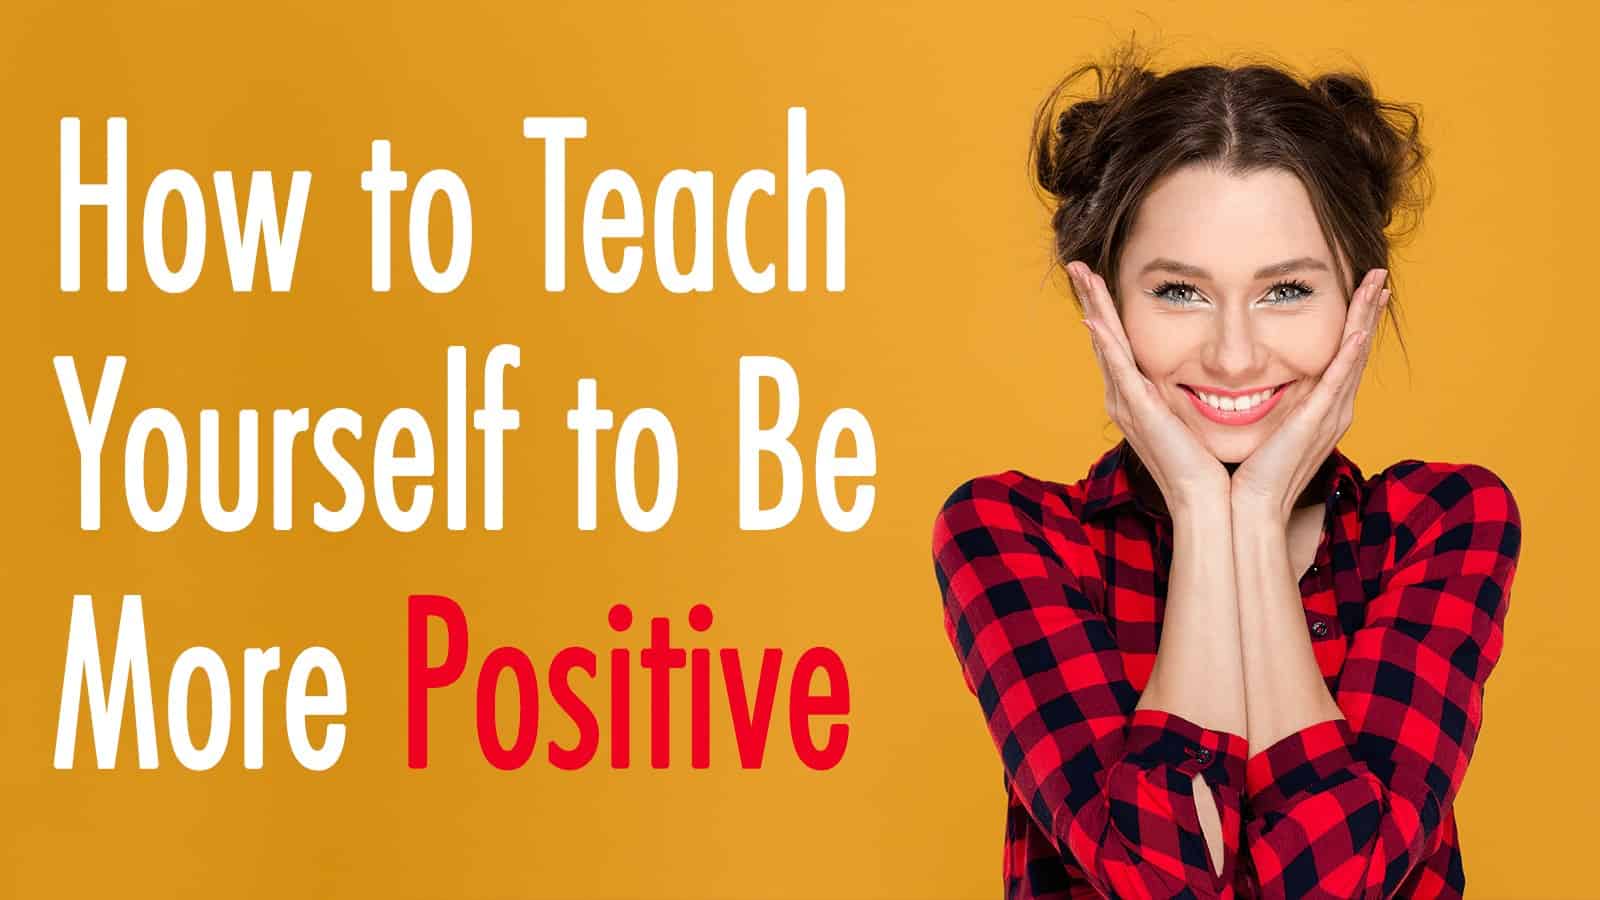 How to Teach Yourself to Be More Positive